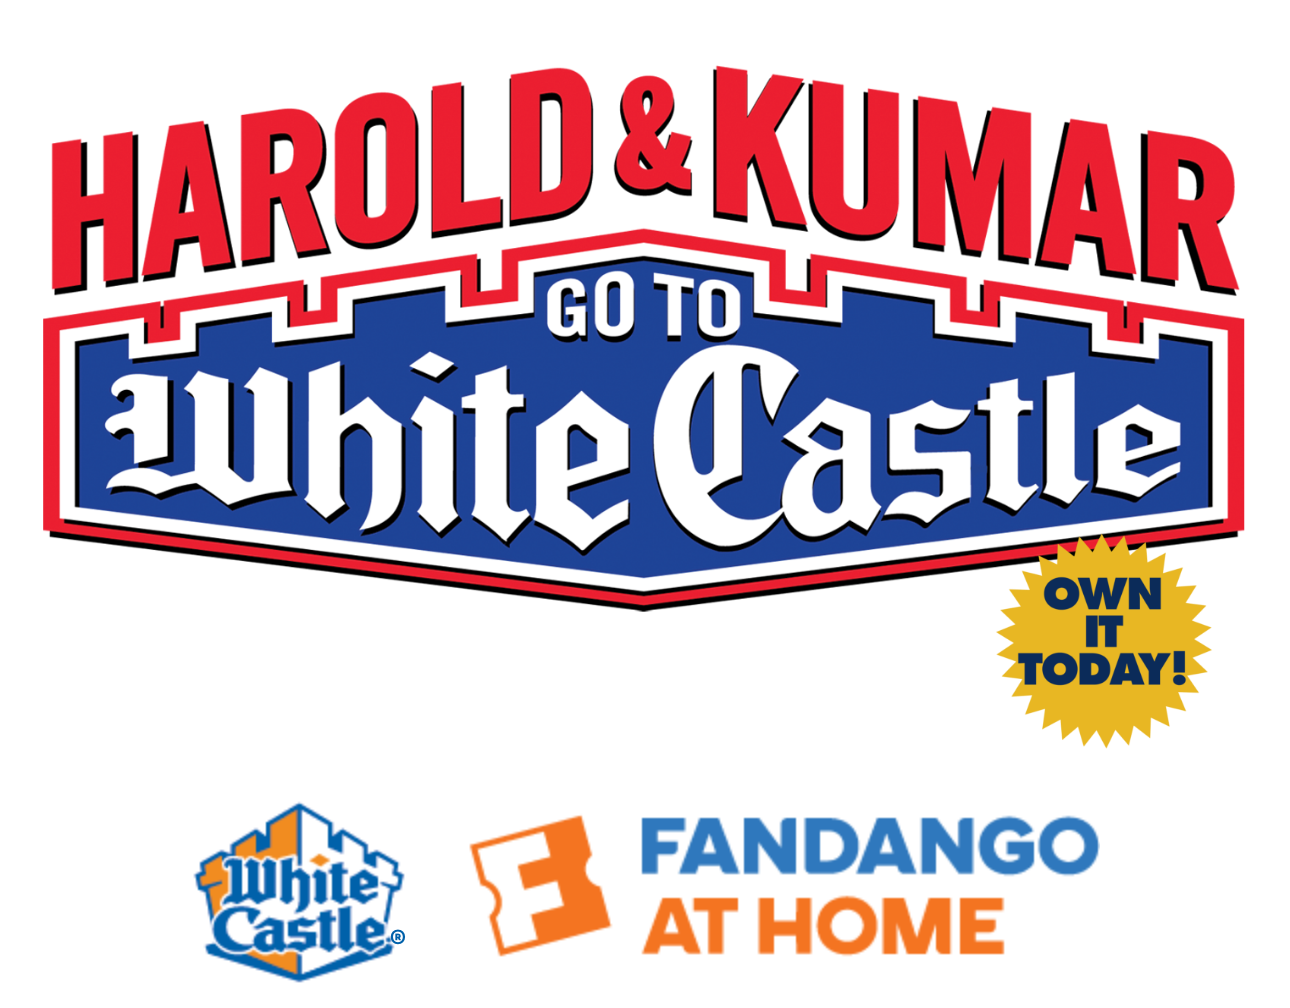 Buy 2+ Particiapting White Castle Products at Participating Store, Get Harold & Kumar Go to White Castle (Fandango at Home Digital Copy)